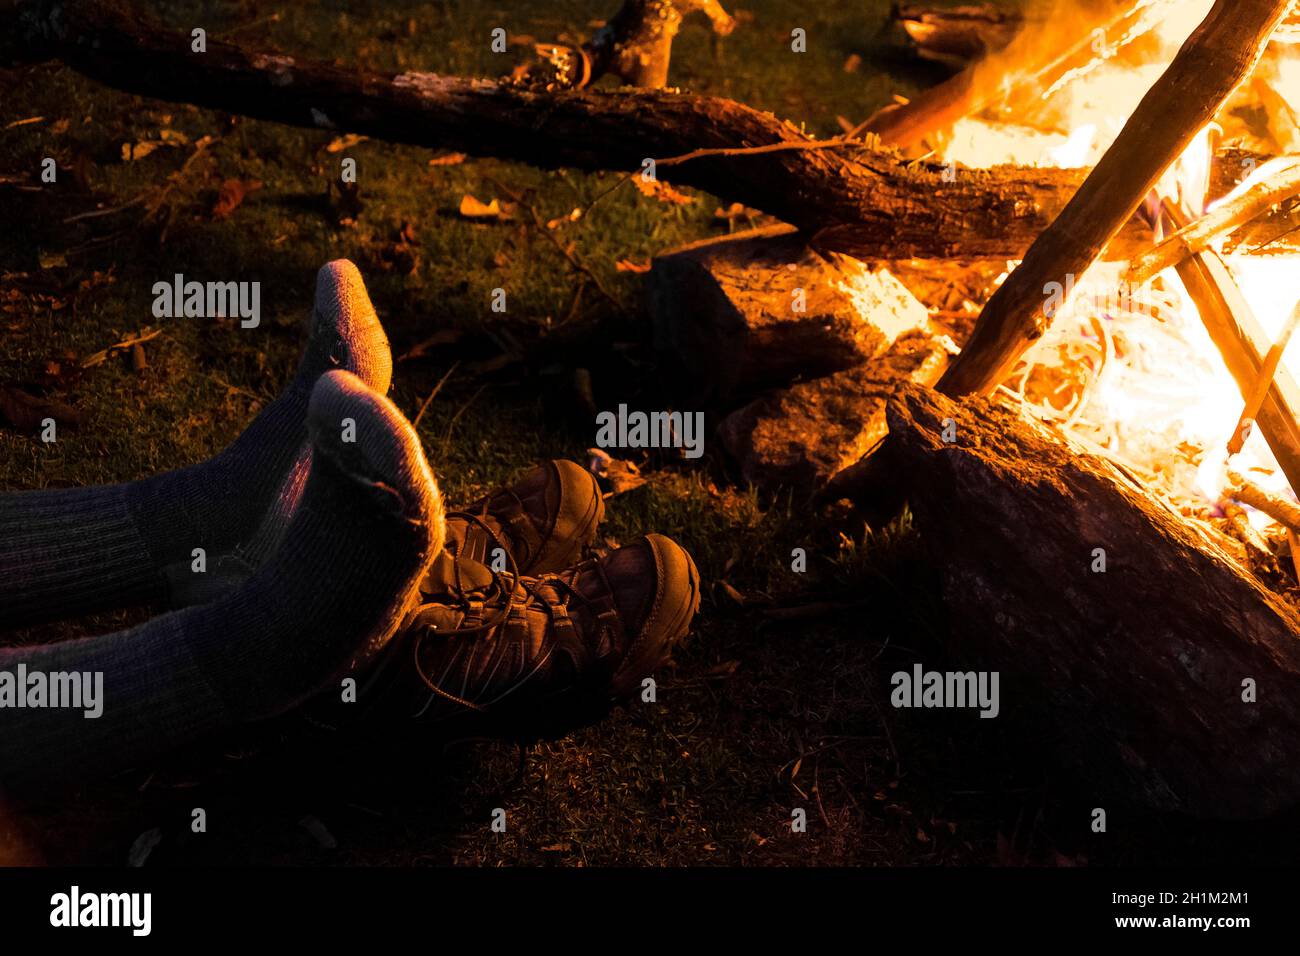 Wet feet in socks drying over a bonfire at a camping site Stock Photo